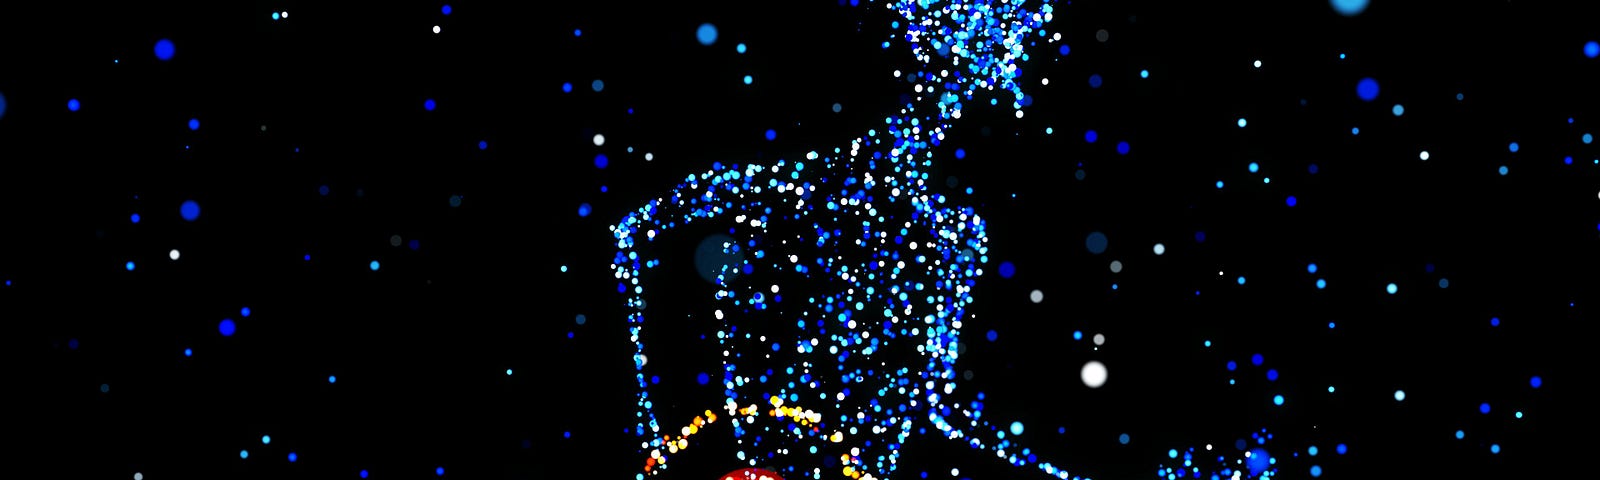 A digital image of a person that looks like he’s made up of blue bubbles against a black background. He is clutching a red bullseye on his back, symbolizing pain.